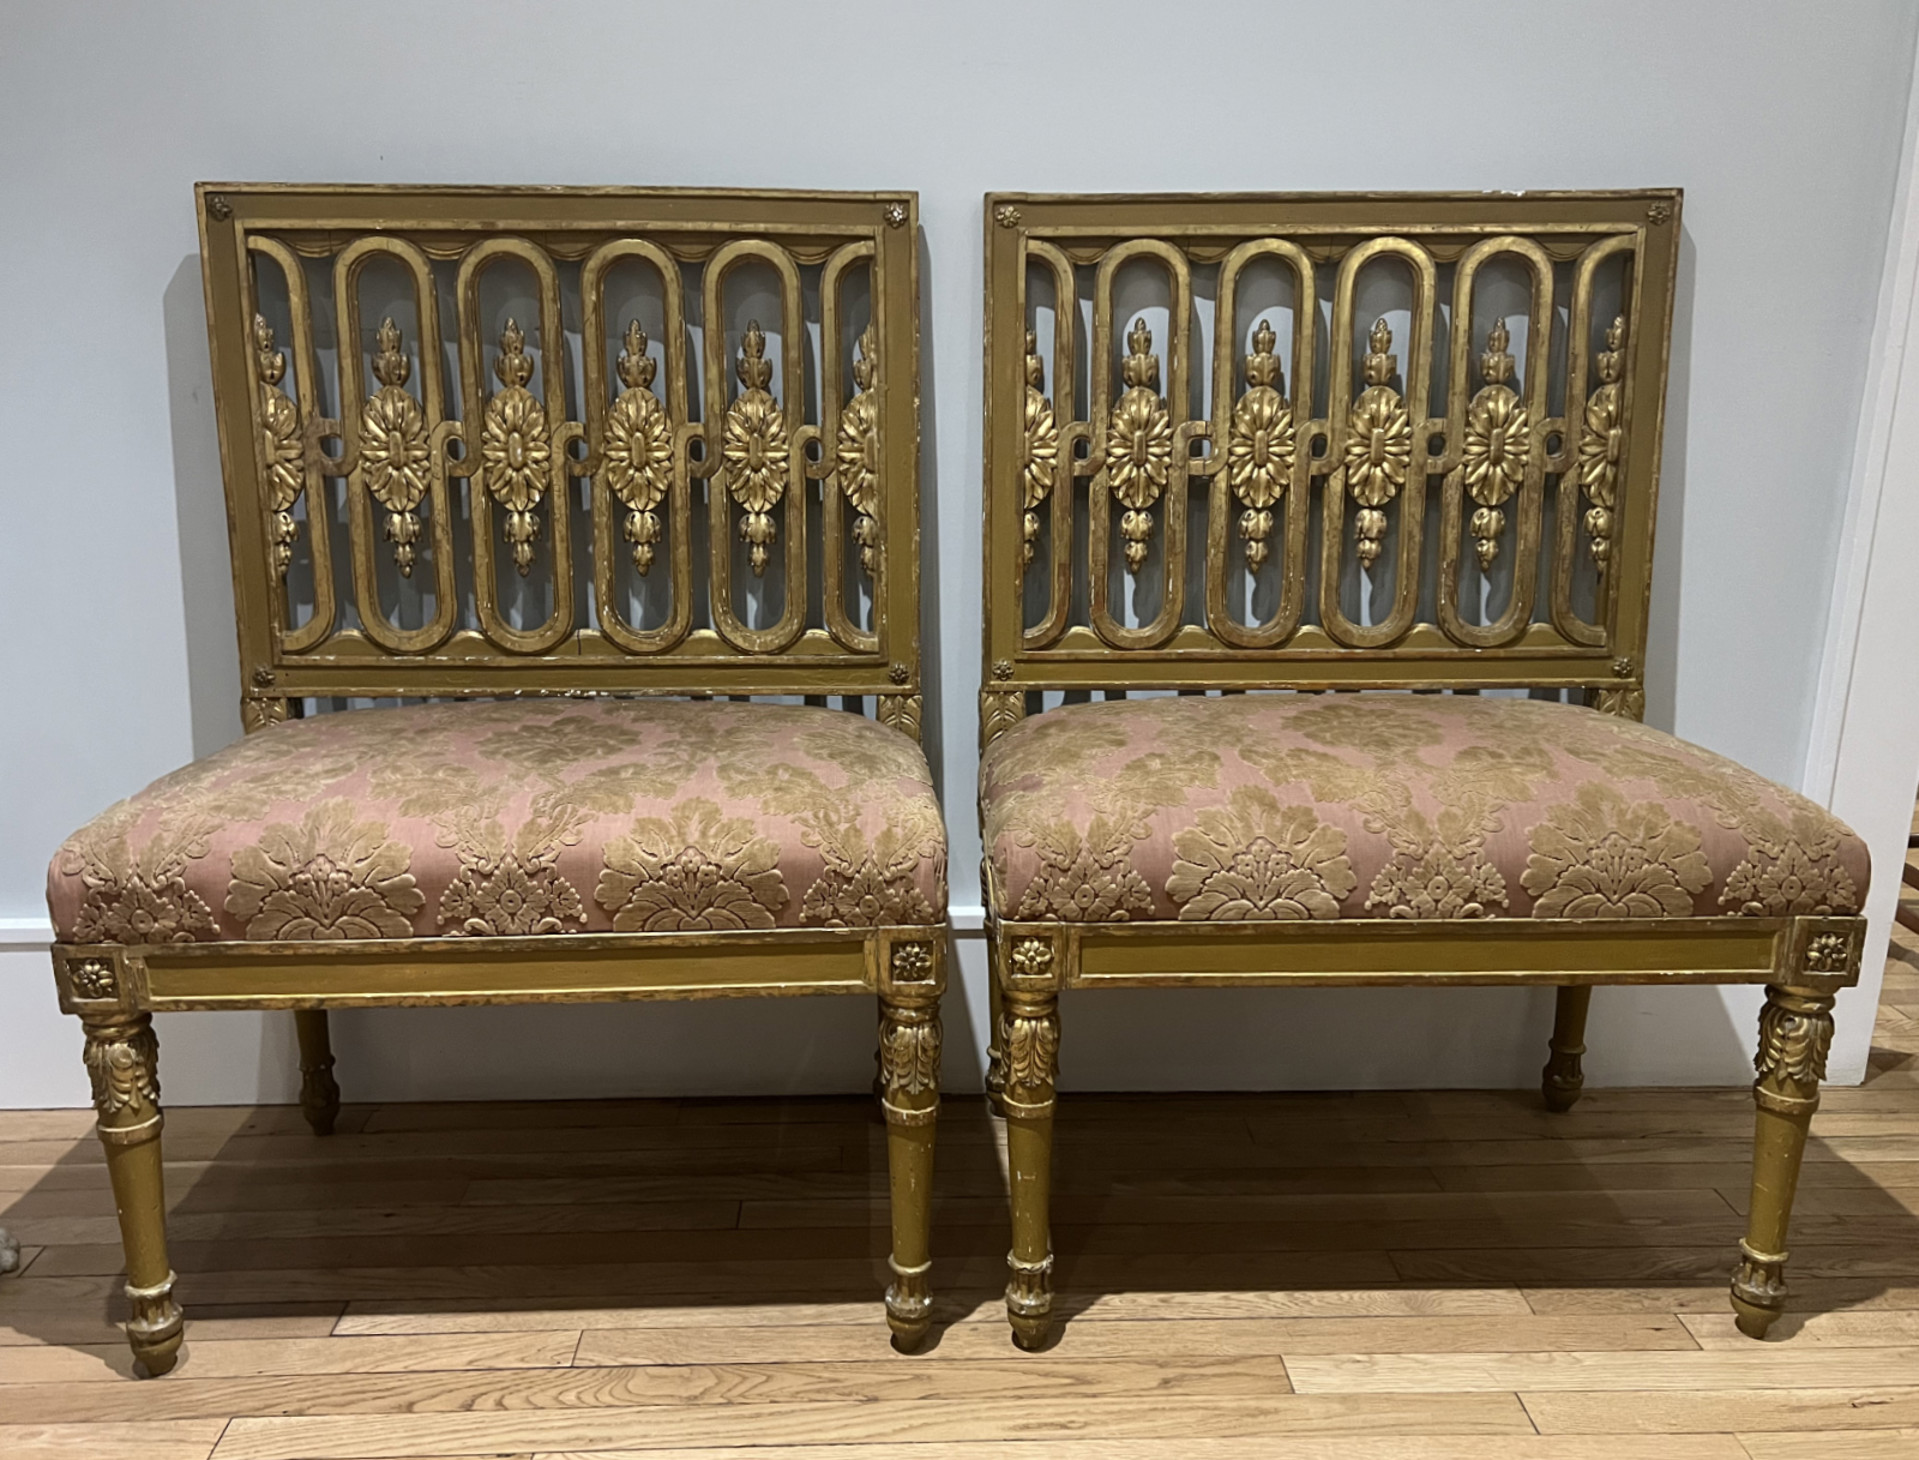 PAIR OF ITALIAN PARCEL-GILT TALL BACK CHAIRS